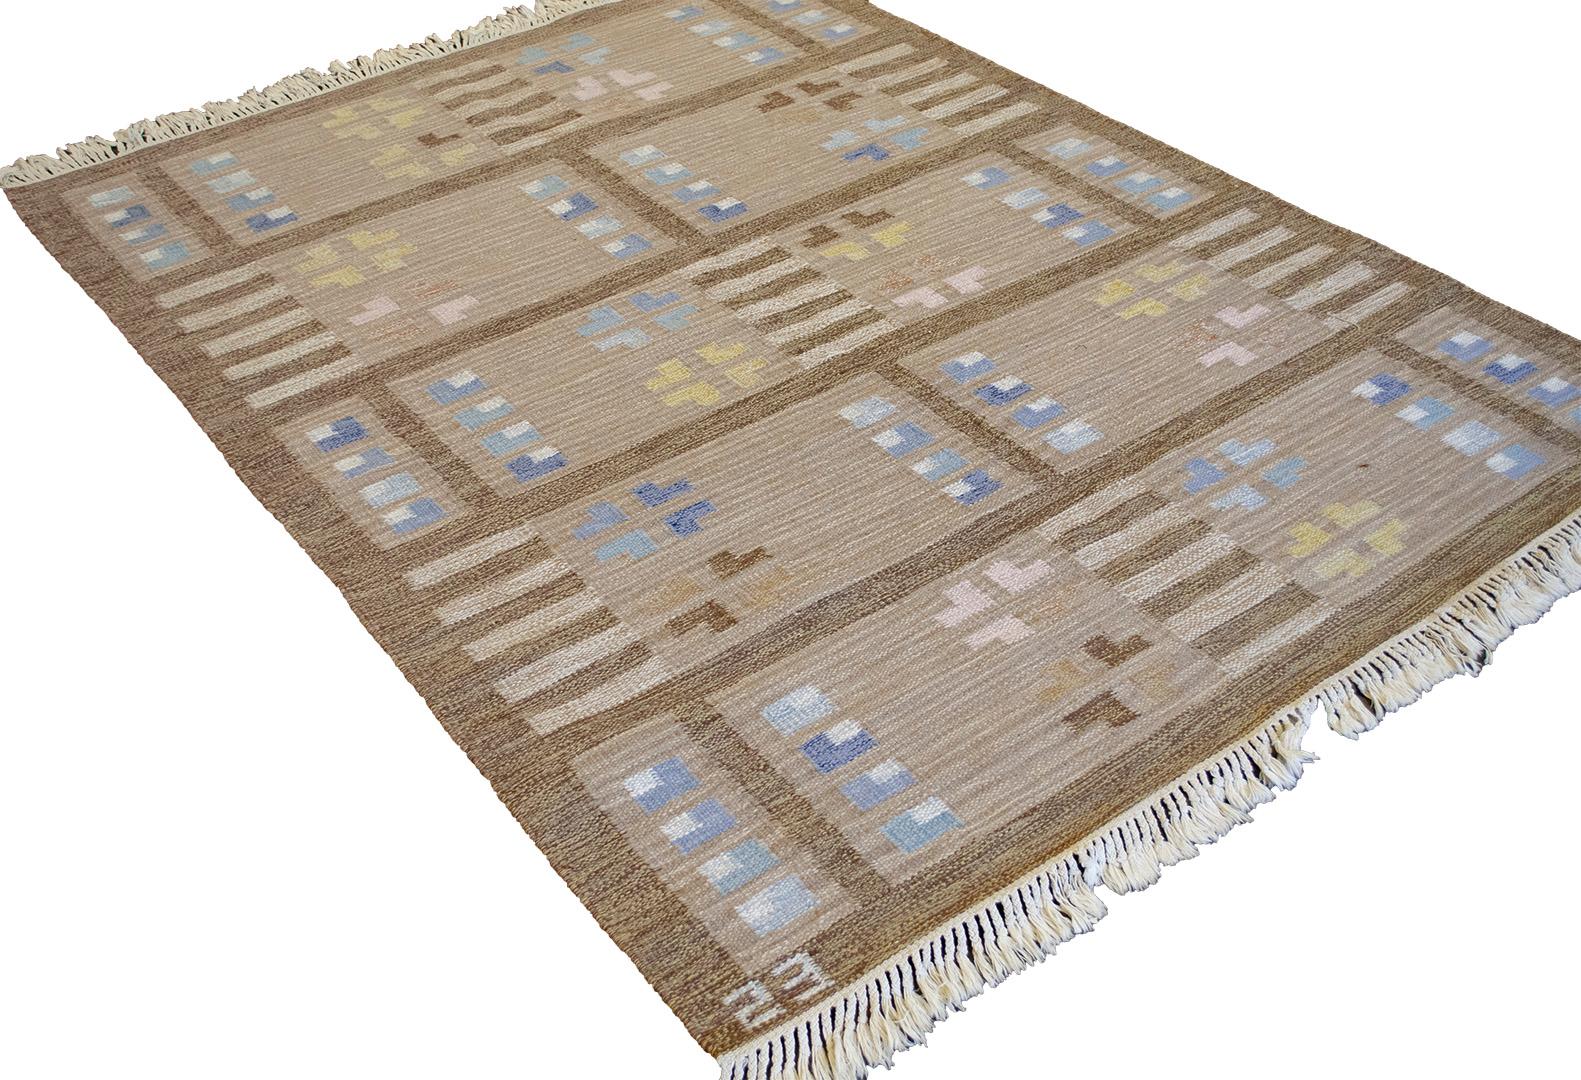 Signed Handwoven Vintage Midcentury Swedish Flat-Weave Rug In Excellent Condition For Sale In West Hollywood, CA